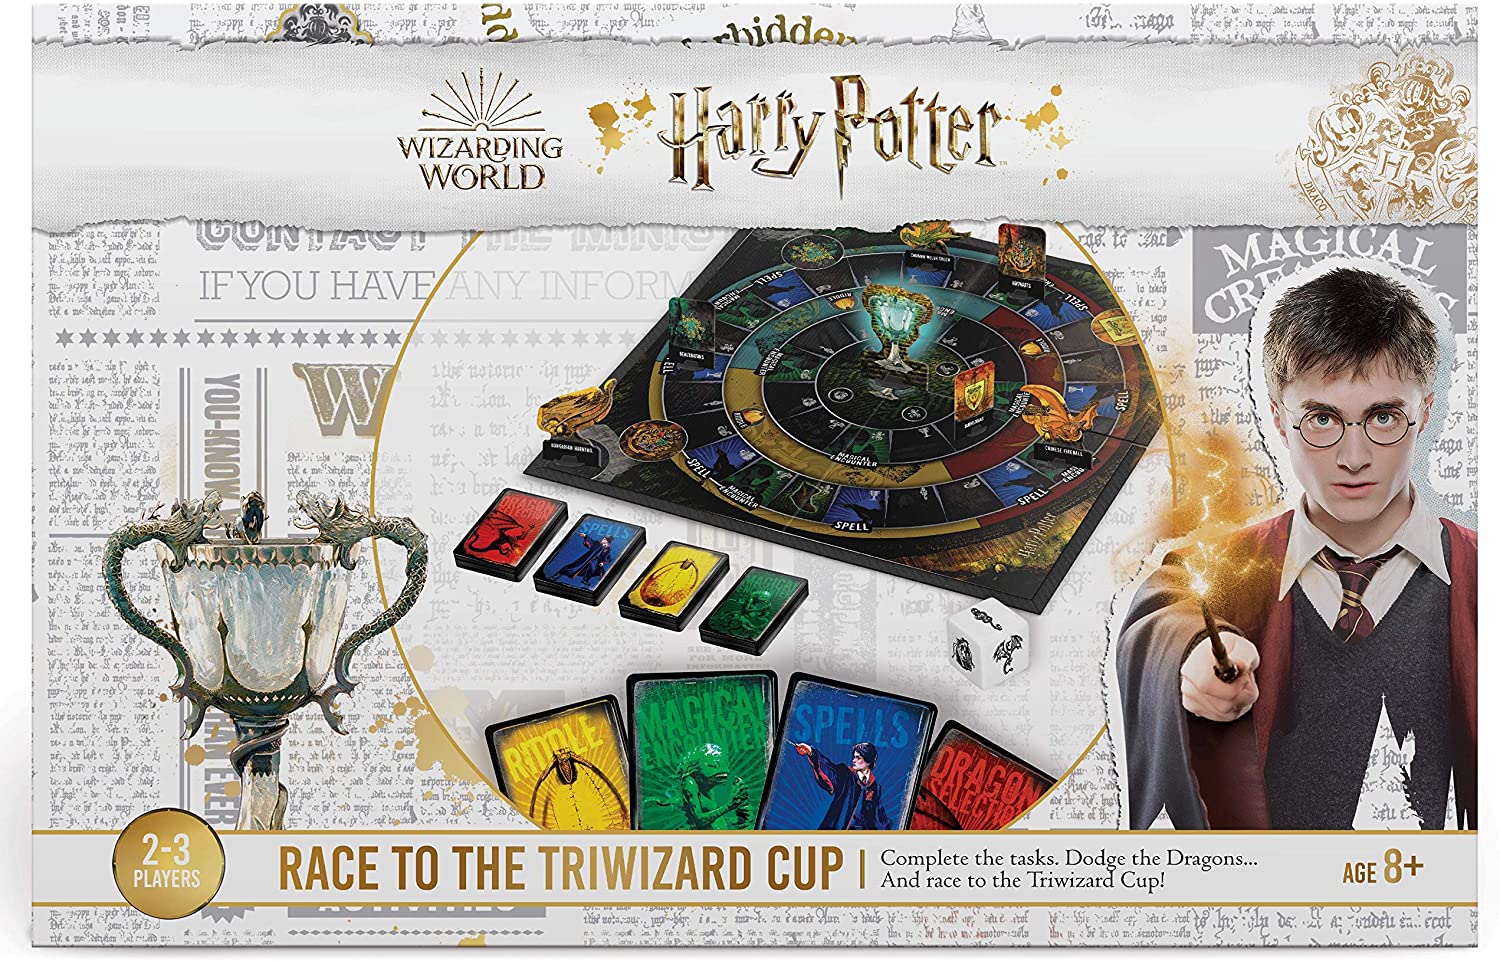 Harry Potter Race To The Triwizard Cup Game